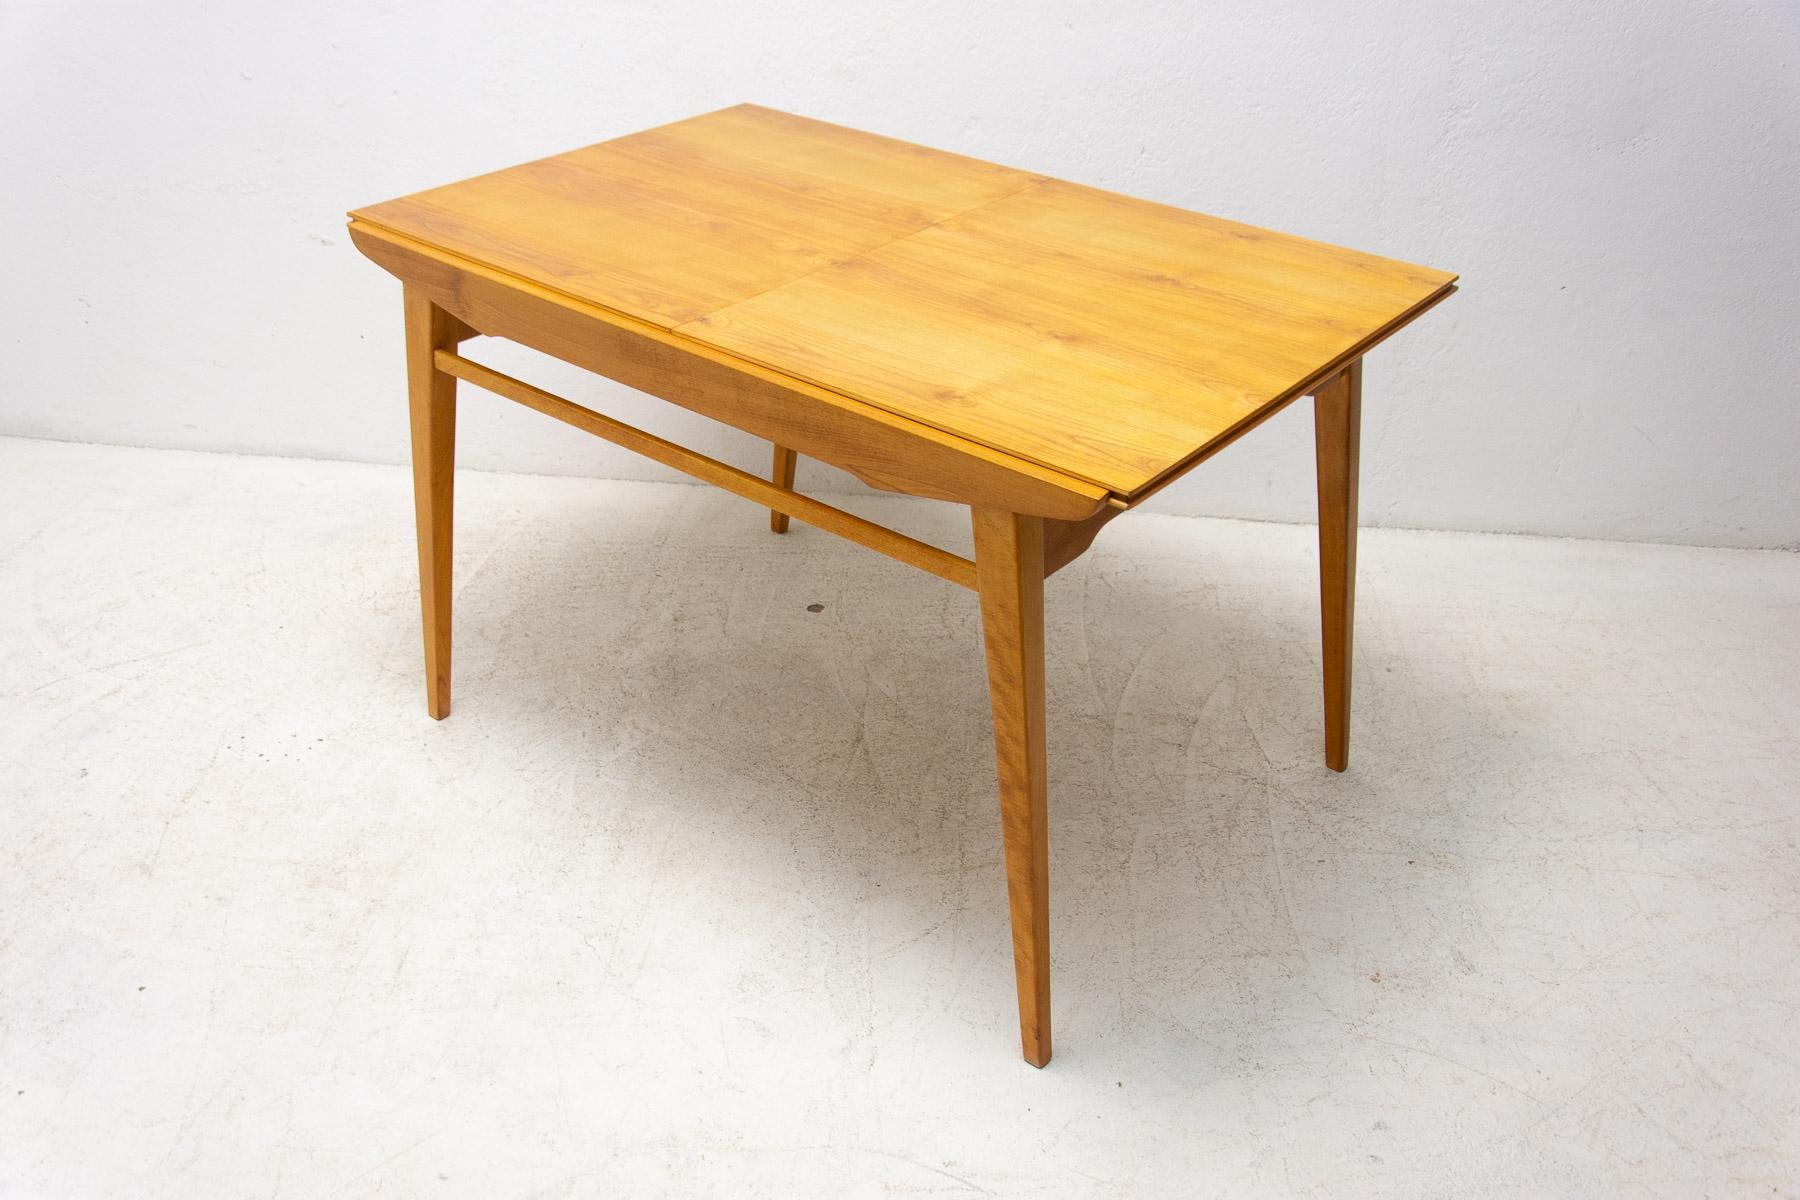 Midcentury Folding Dining Table by Bohumil Landsman for Jitona, 1970s For Sale 2